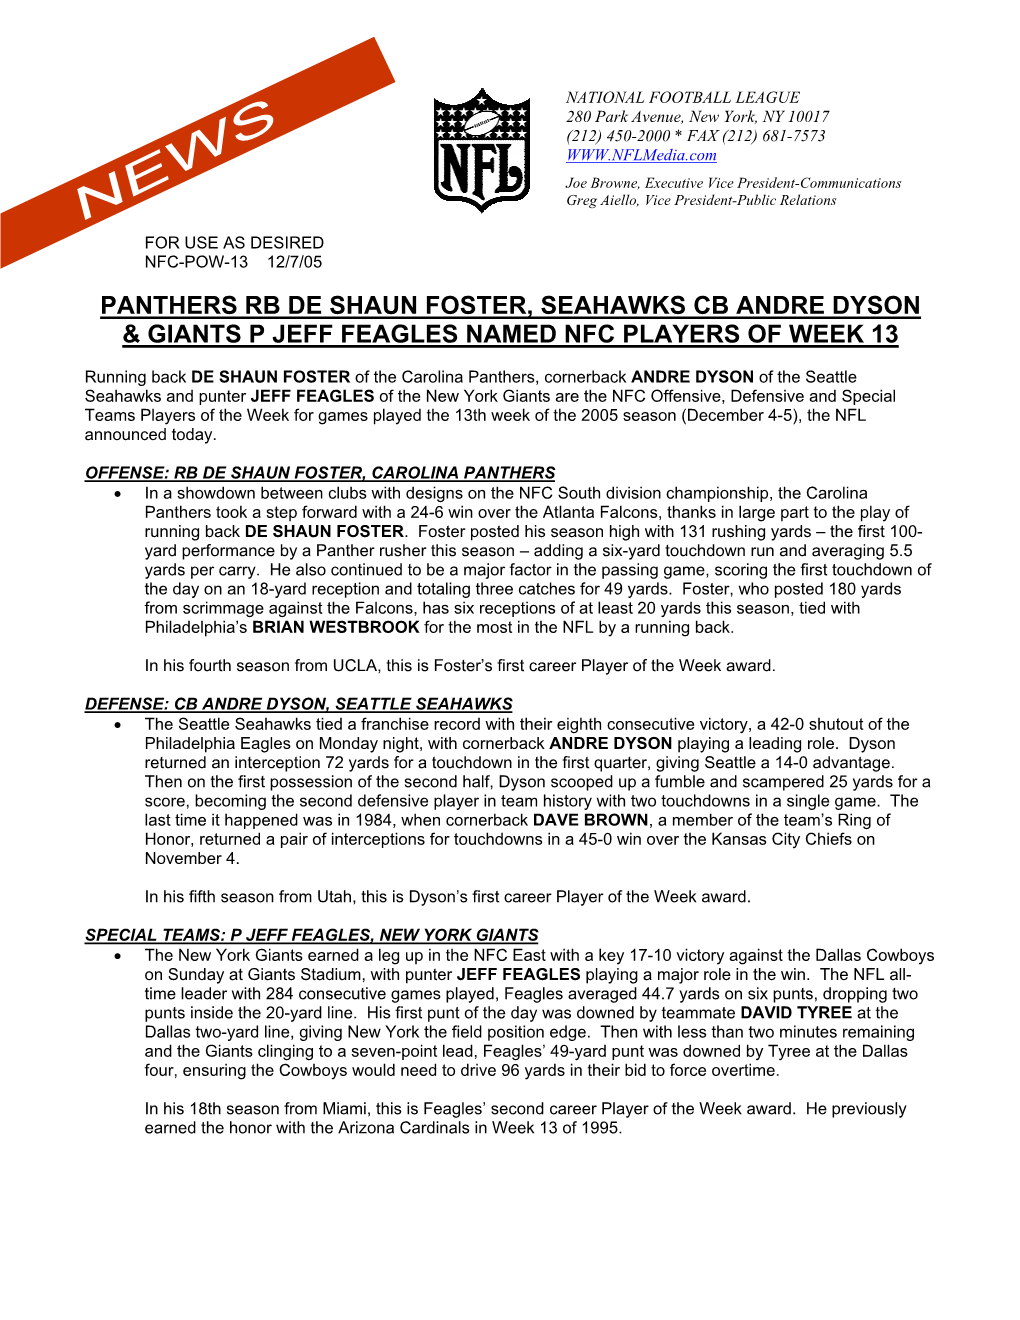 Panthers Rb De Shaun Foster, Seahawks Cb Andre Dyson & Giants P Jeff Feagles Named Nfc Players of Week 13